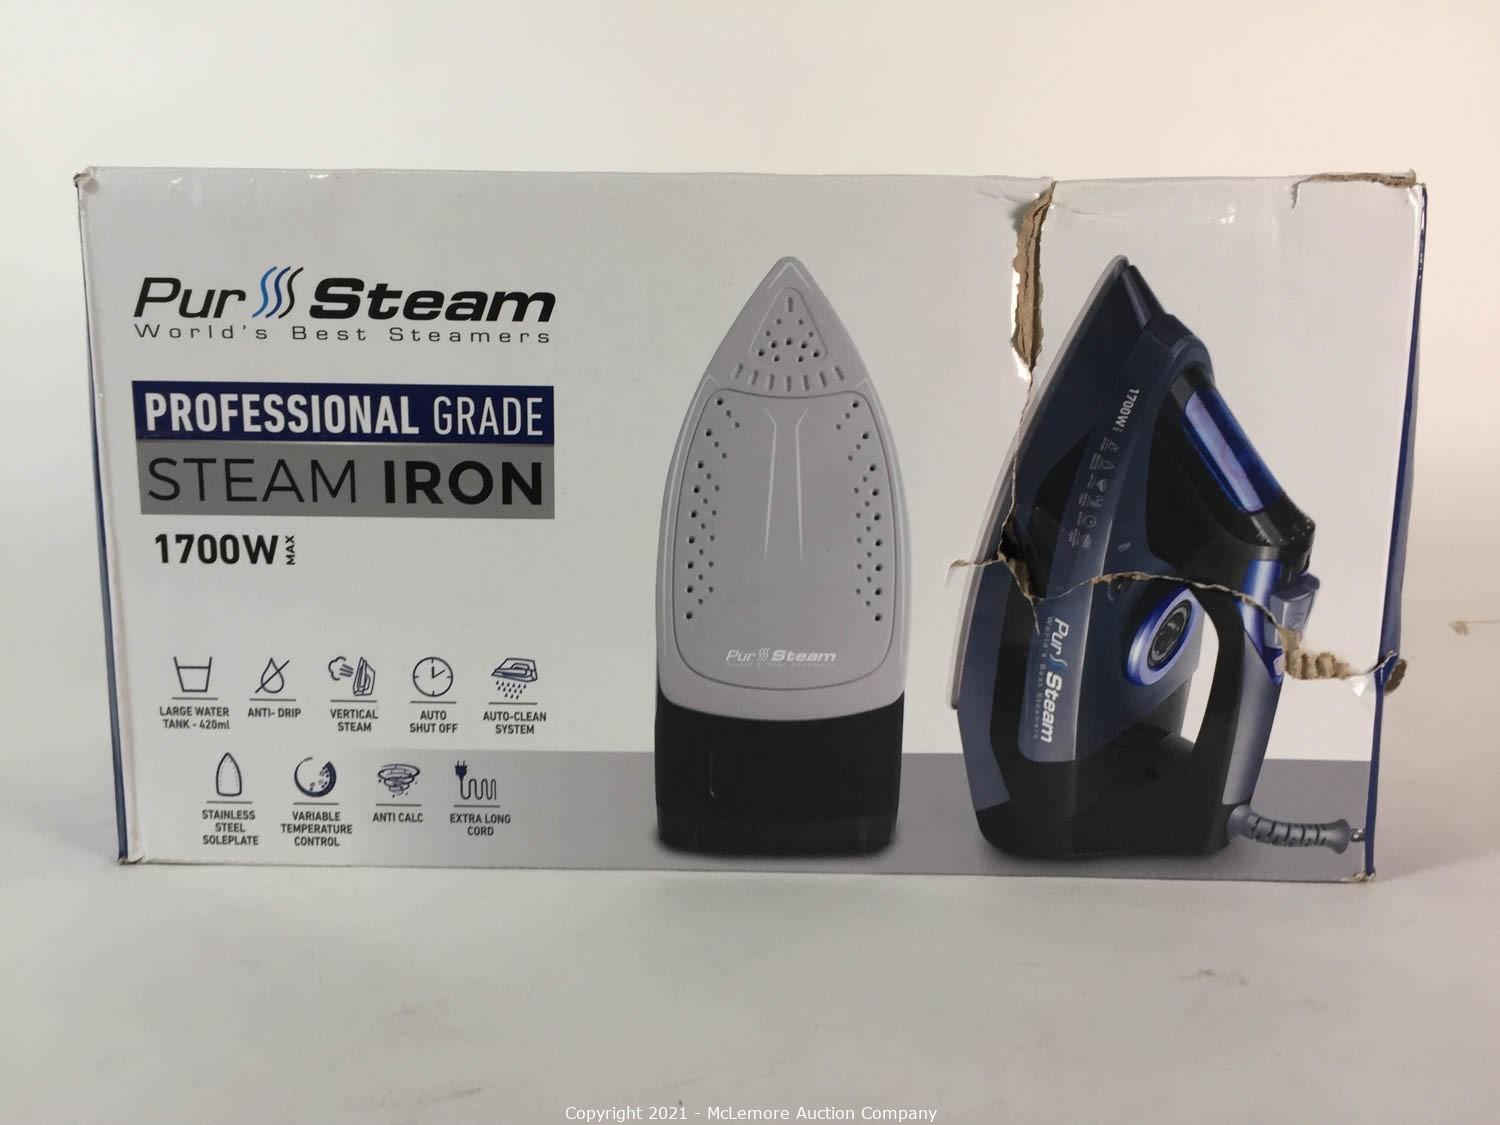 McLemore Auction Company - Auction: Electronics, Gaming, Home Goods, Beauty  Products, Toys, Power Tools, Clothing, Accessories, Appliances and More  ITEM: Professional Grade 1700W Steam Iron for Clothes with Rapid Even Heat  Scratch